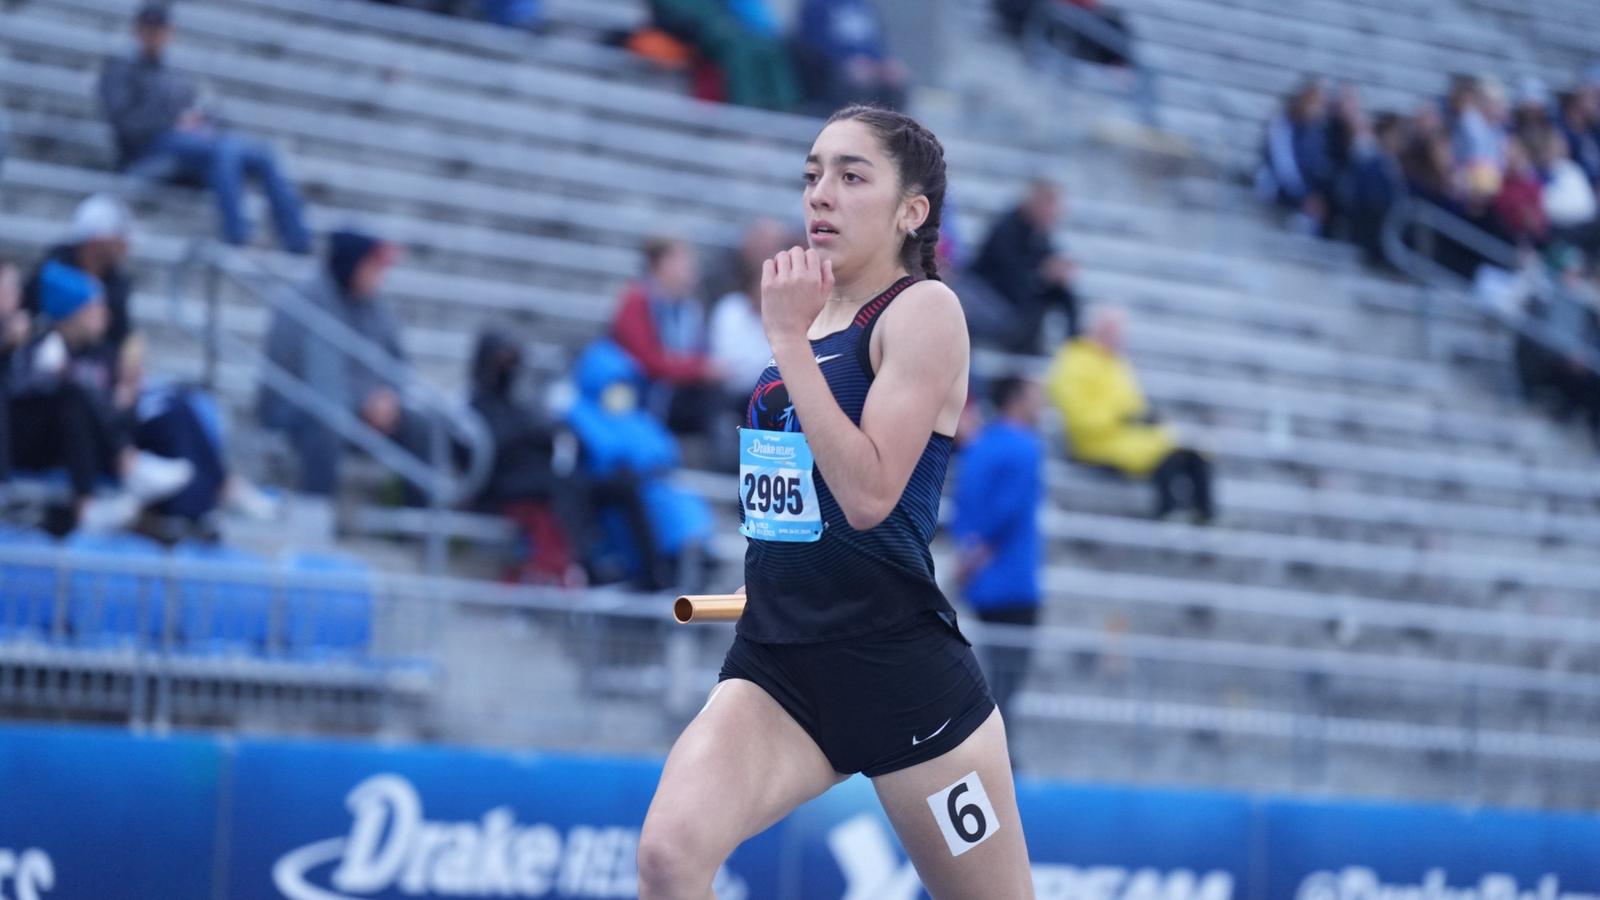 DePaul Breaks Four School Records on Final Day of Drake Relays